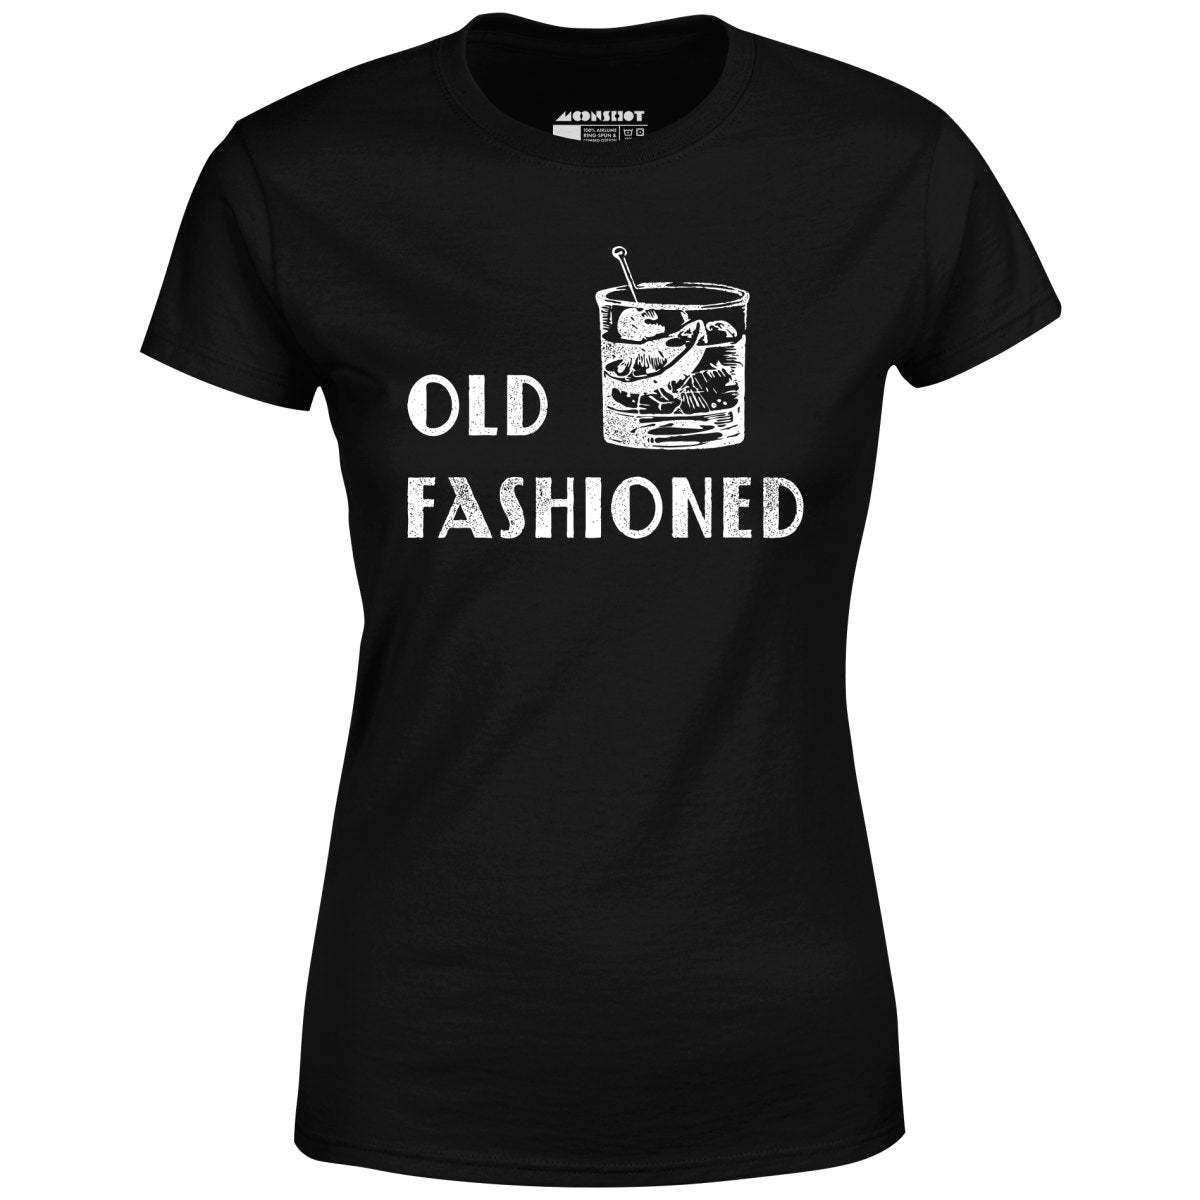 Old Fashioned - Women's T-Shirt